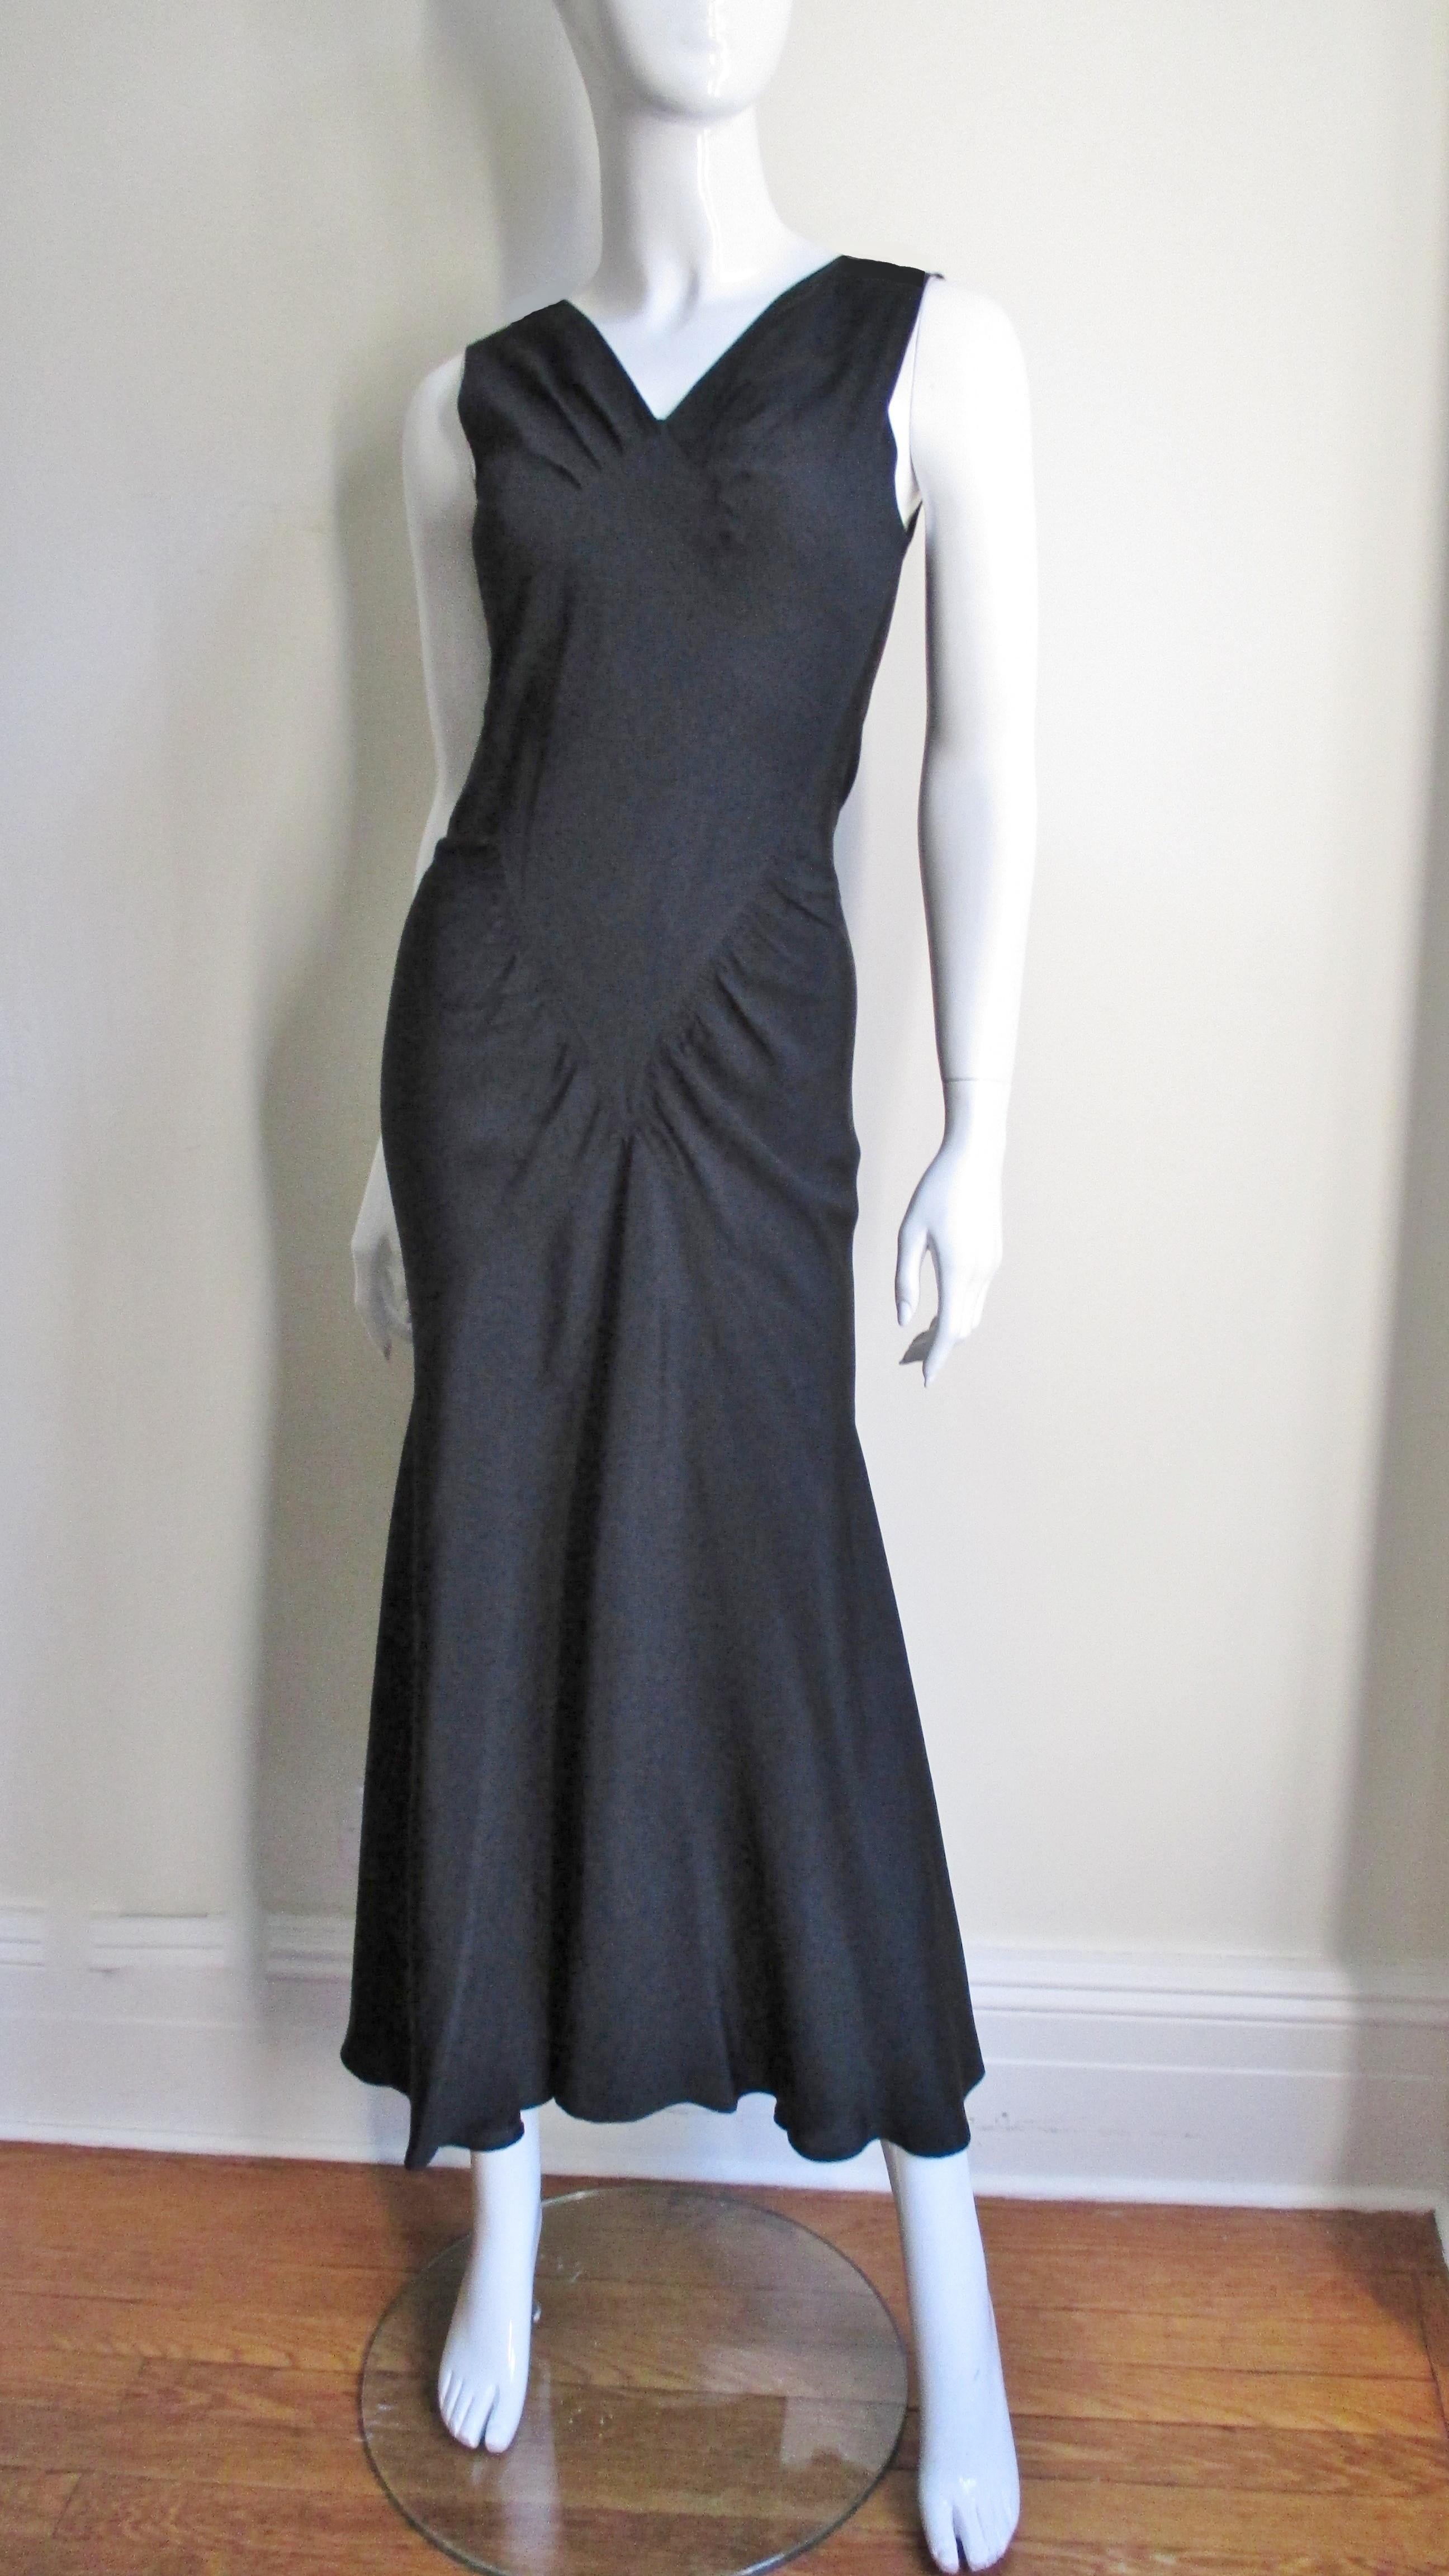 A fabulous black silk 1930's gown with incredible seaming and lines plus a white broiderie anglaise bolero jacket. The dress skims the body with a front V neckline, sides gathered onto a diamond shaped panel then flares to the hand stitched hem.  It